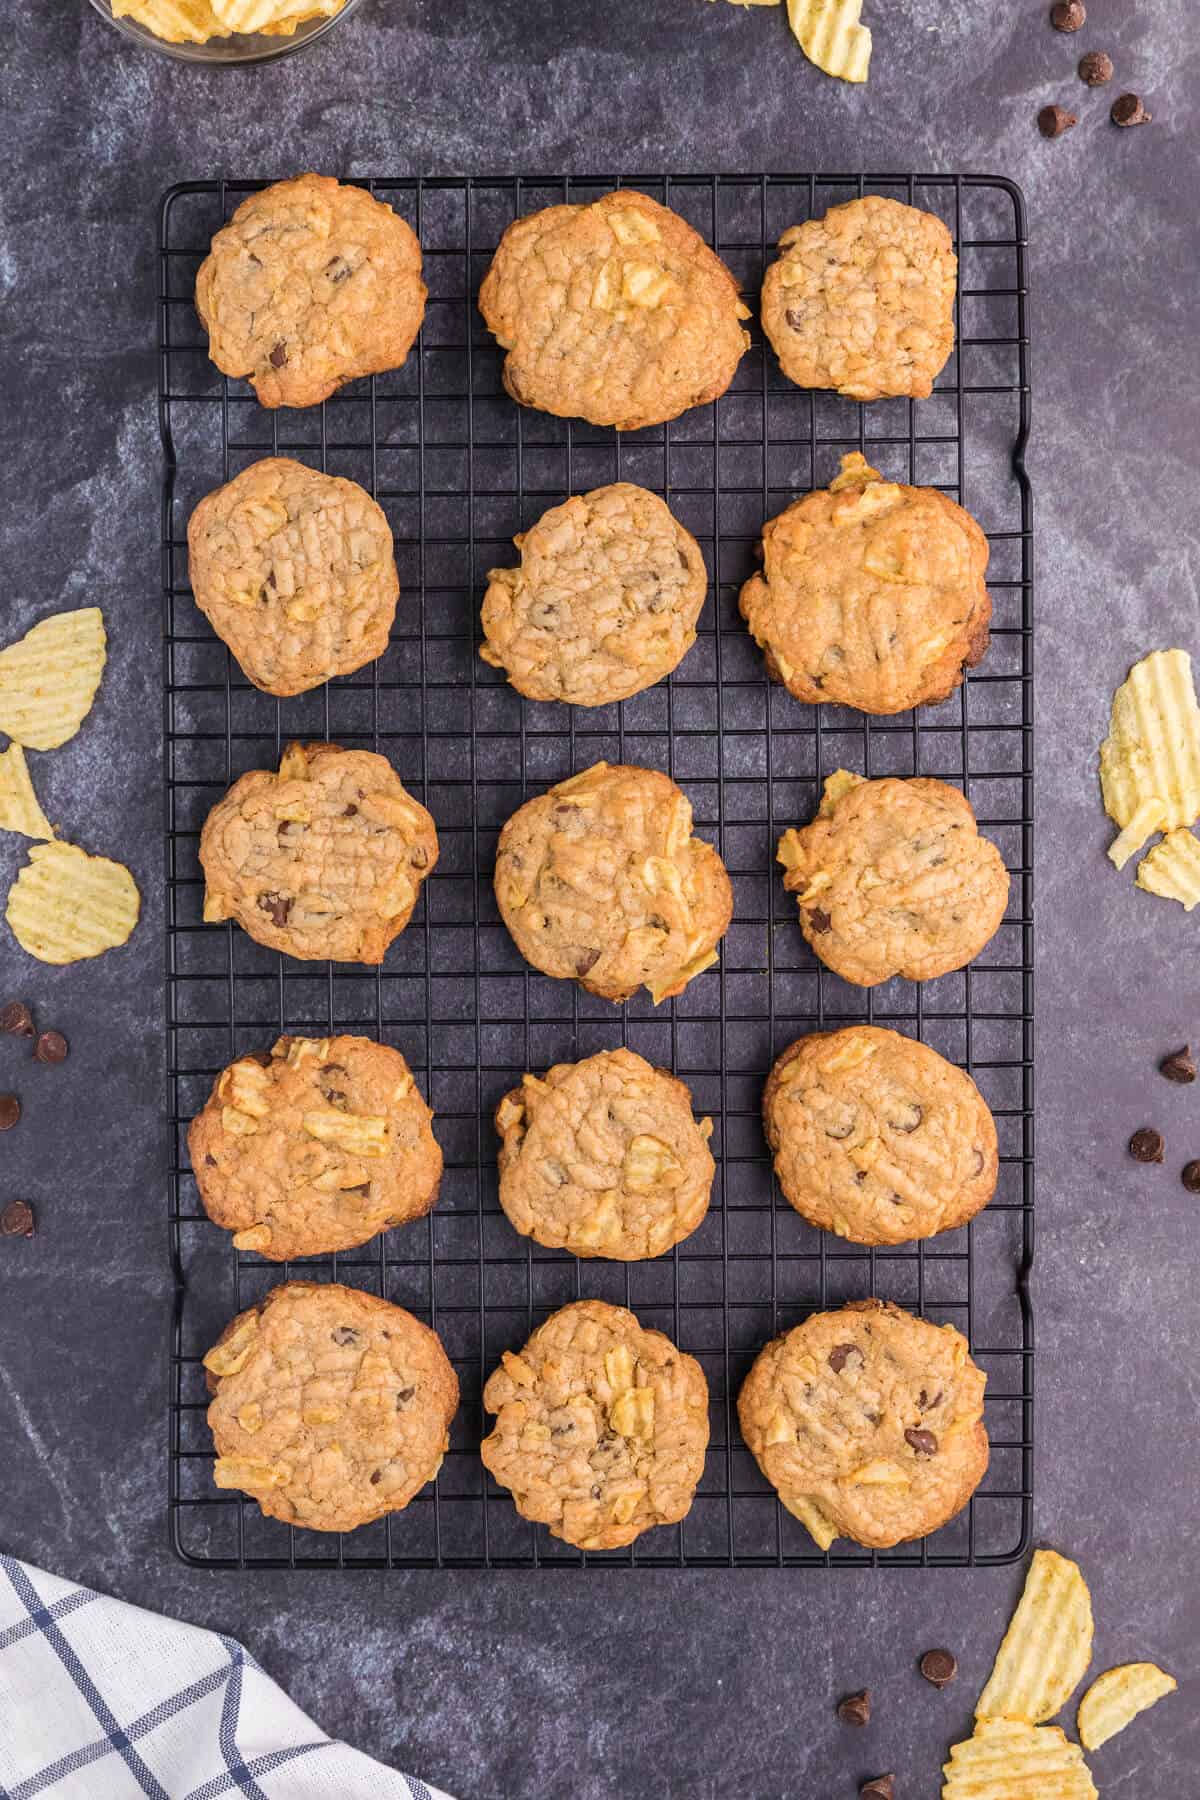 Potato Chip Cookies - The best cookie recipe to make when you're craving something salty and sweet! Packed with chocolate chips and potato chips, this easy dessert has just the right amount of crunch.